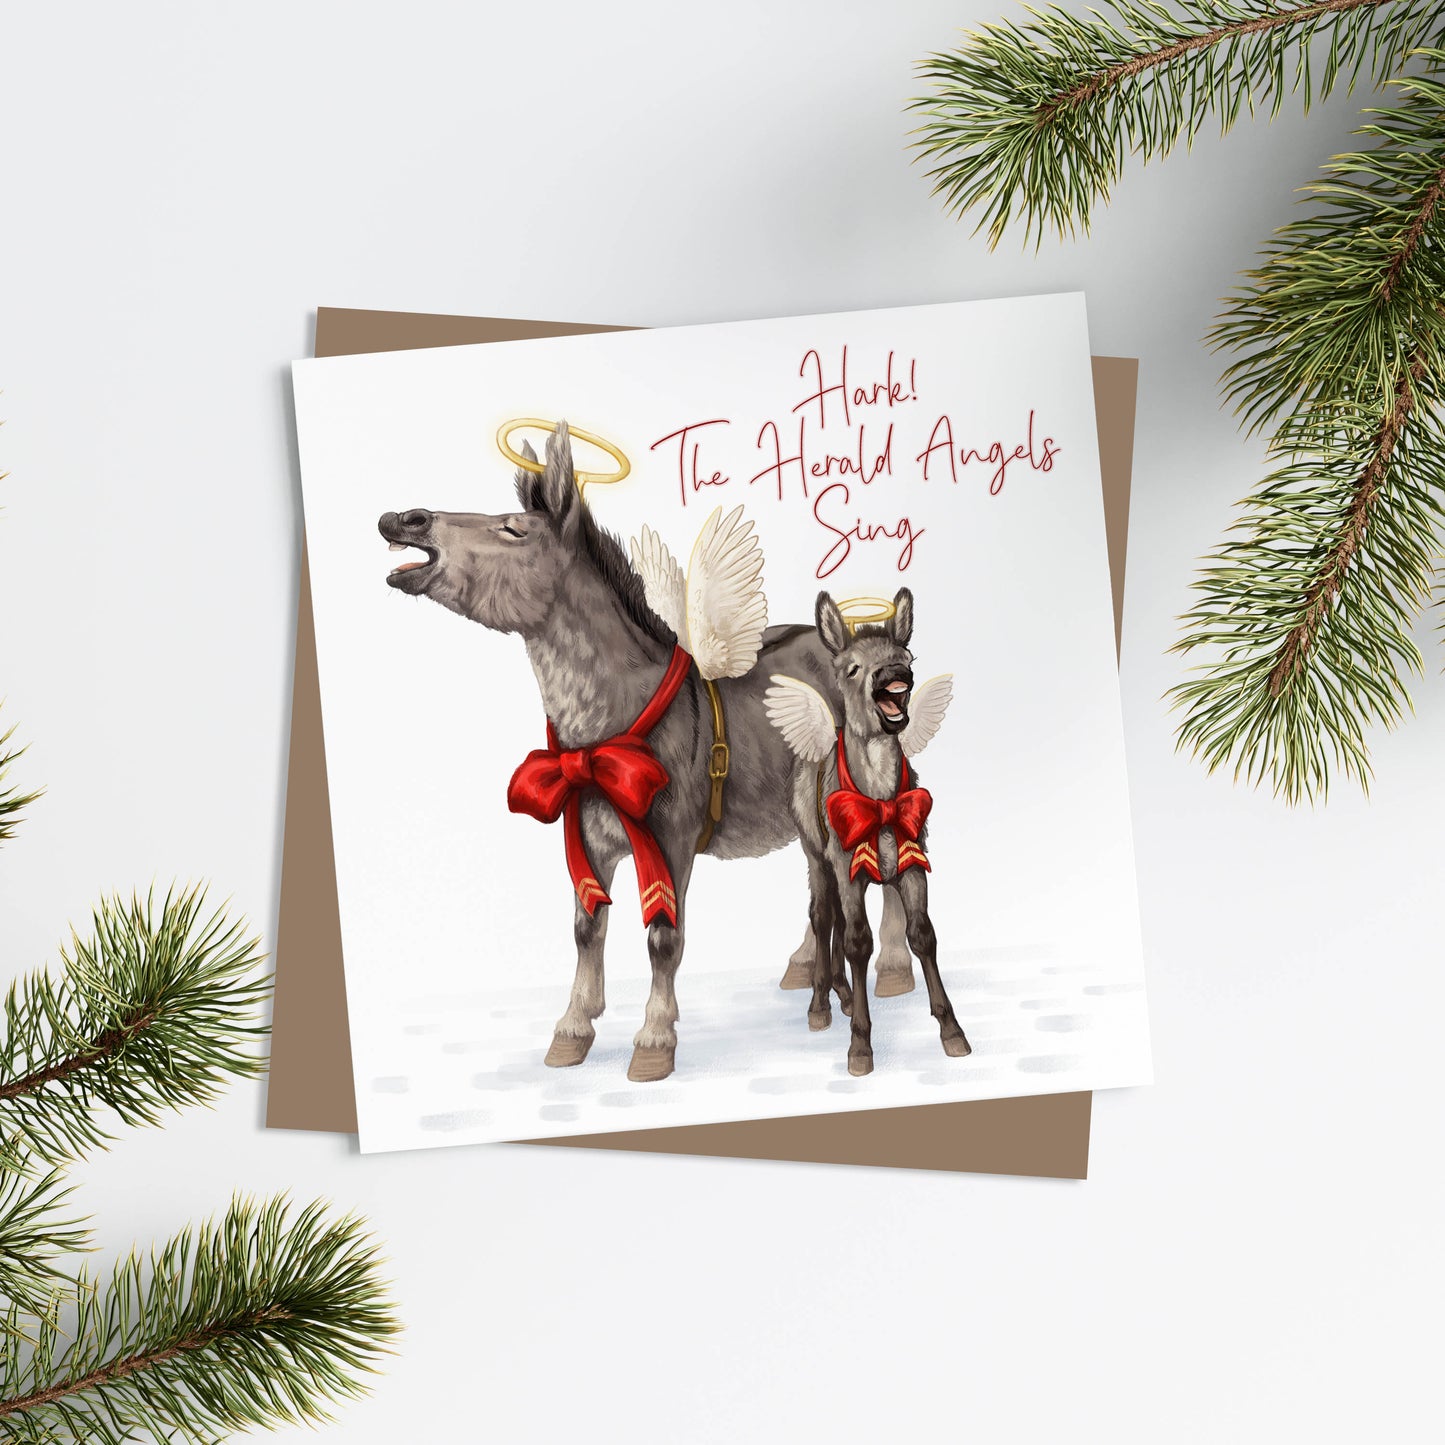 Hark the Herald Angels Sing - Donkey Christmas Greetings Card (White)